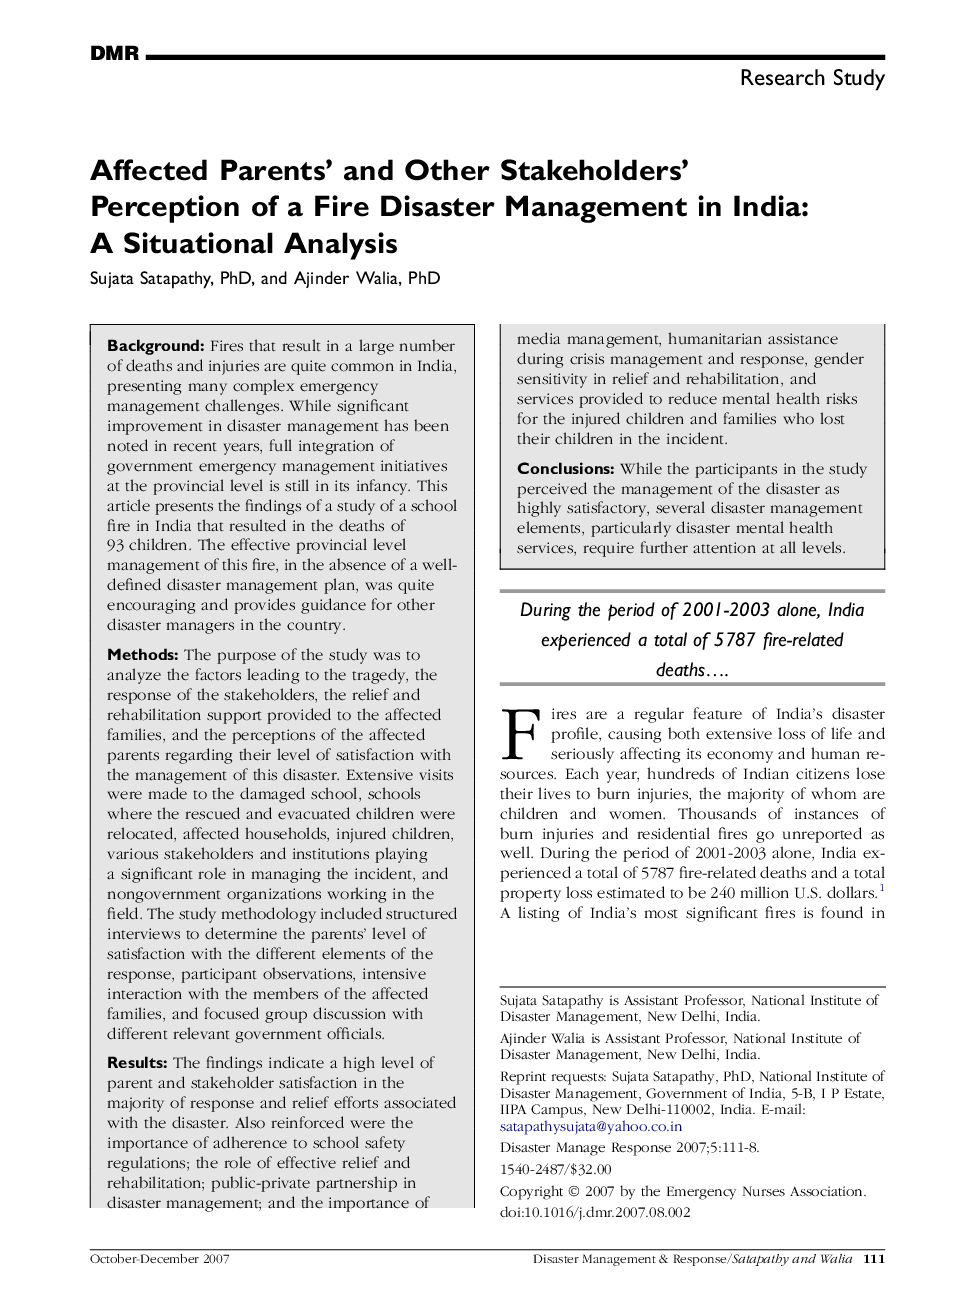 Affected Parents' and Other Stakeholders' Perception of a Fire Disaster Management in India: A Situational Analysis